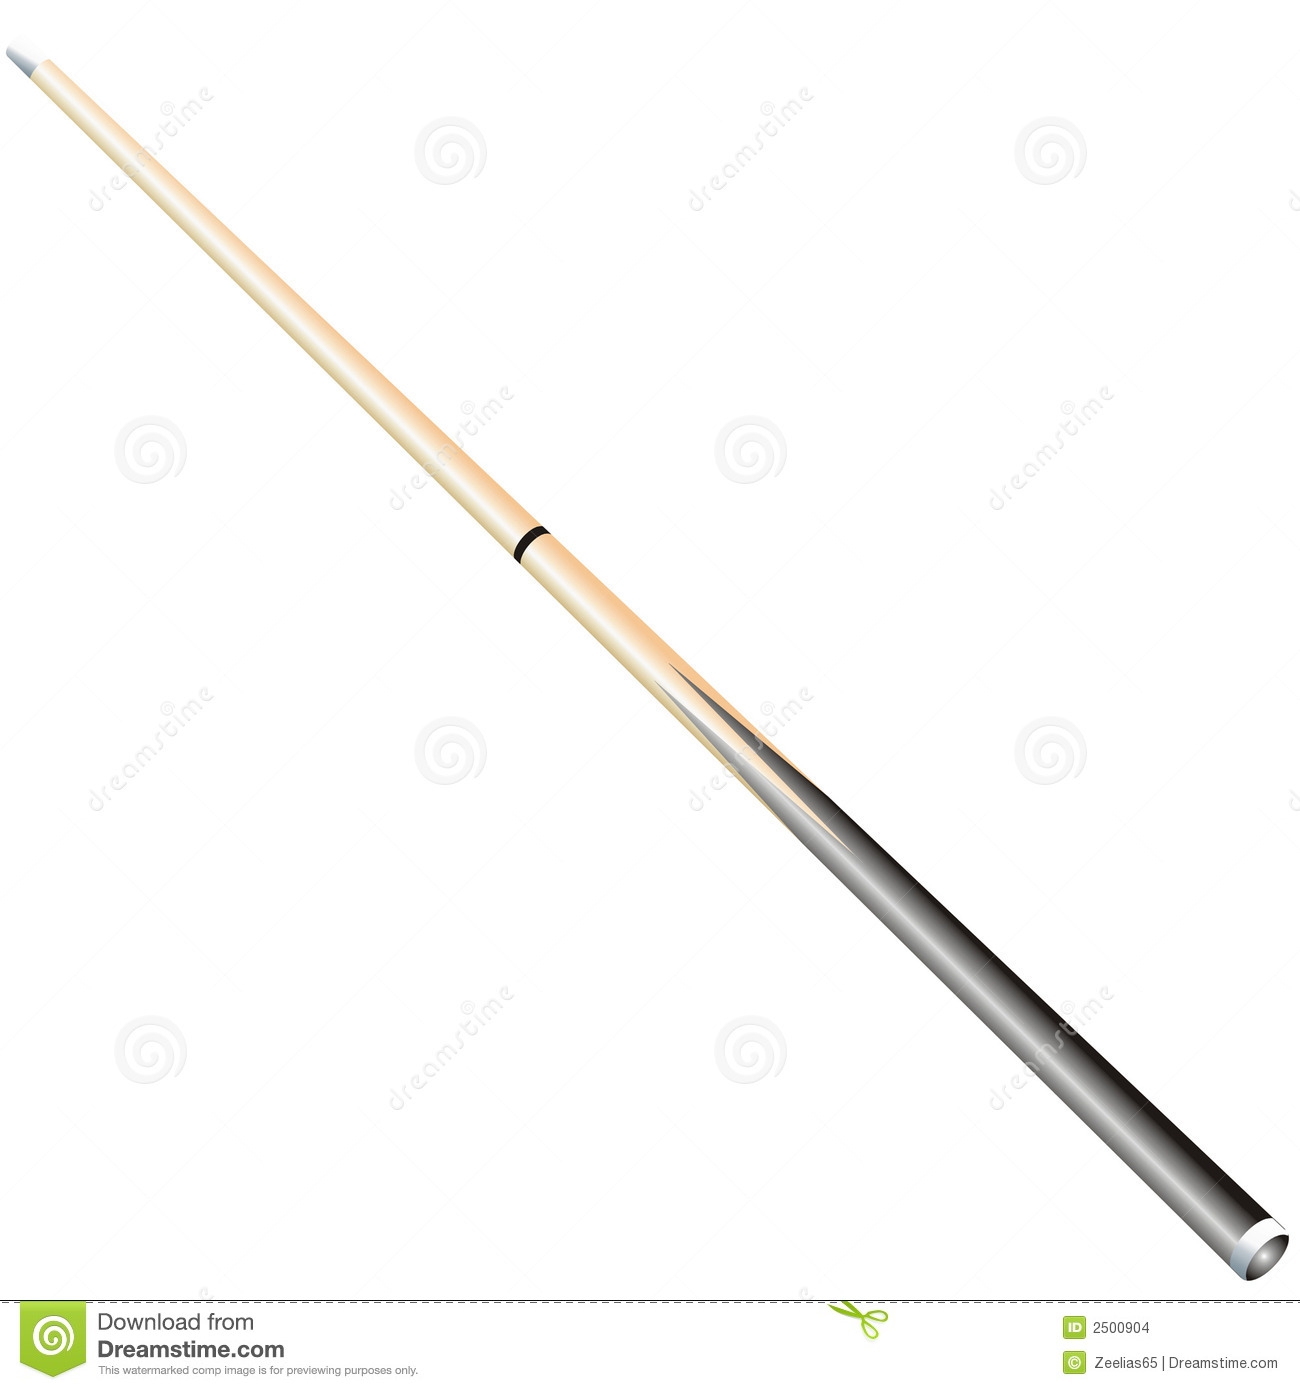 Cue Stick clipart #4, Download drawings